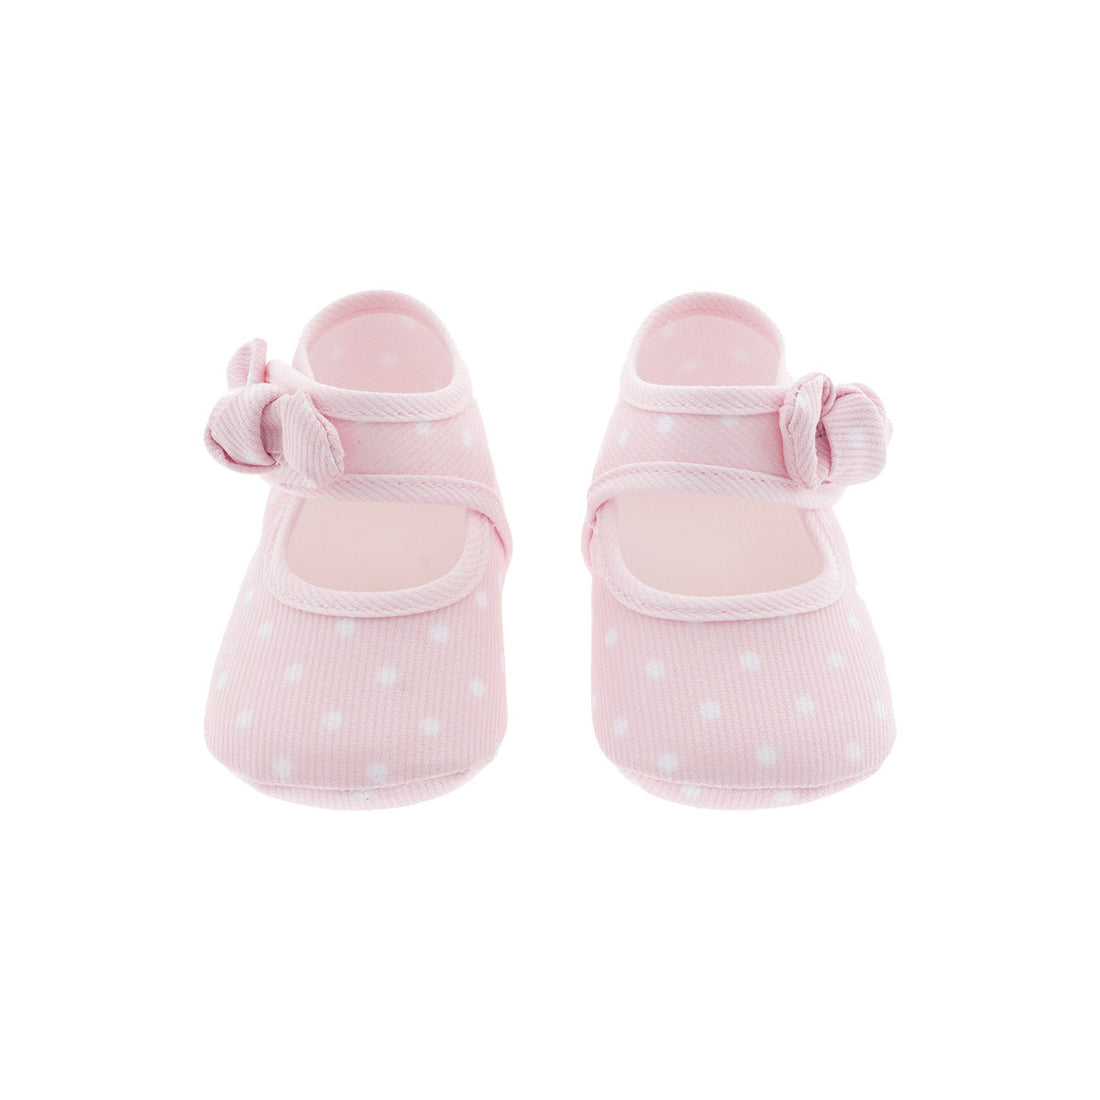 r&j-cambrass-sa-summer-baby-shoes-262-unic- (2)